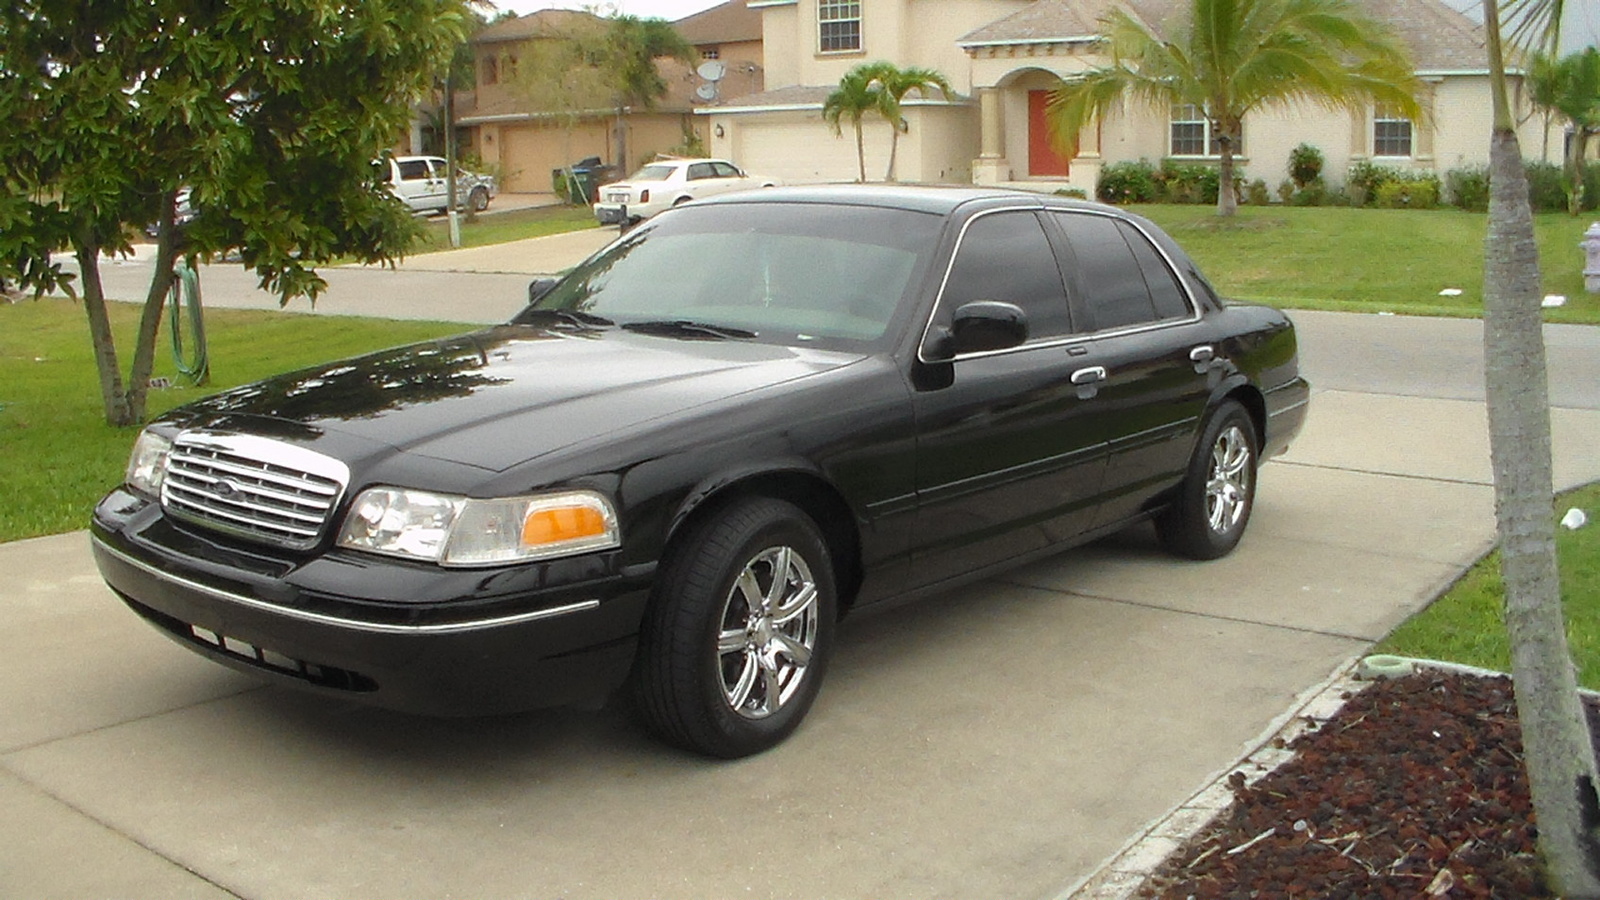 Ford Crown Victoria Questions - I would like to jazz up my 2003 Ford Crown  Vic - CarGurus